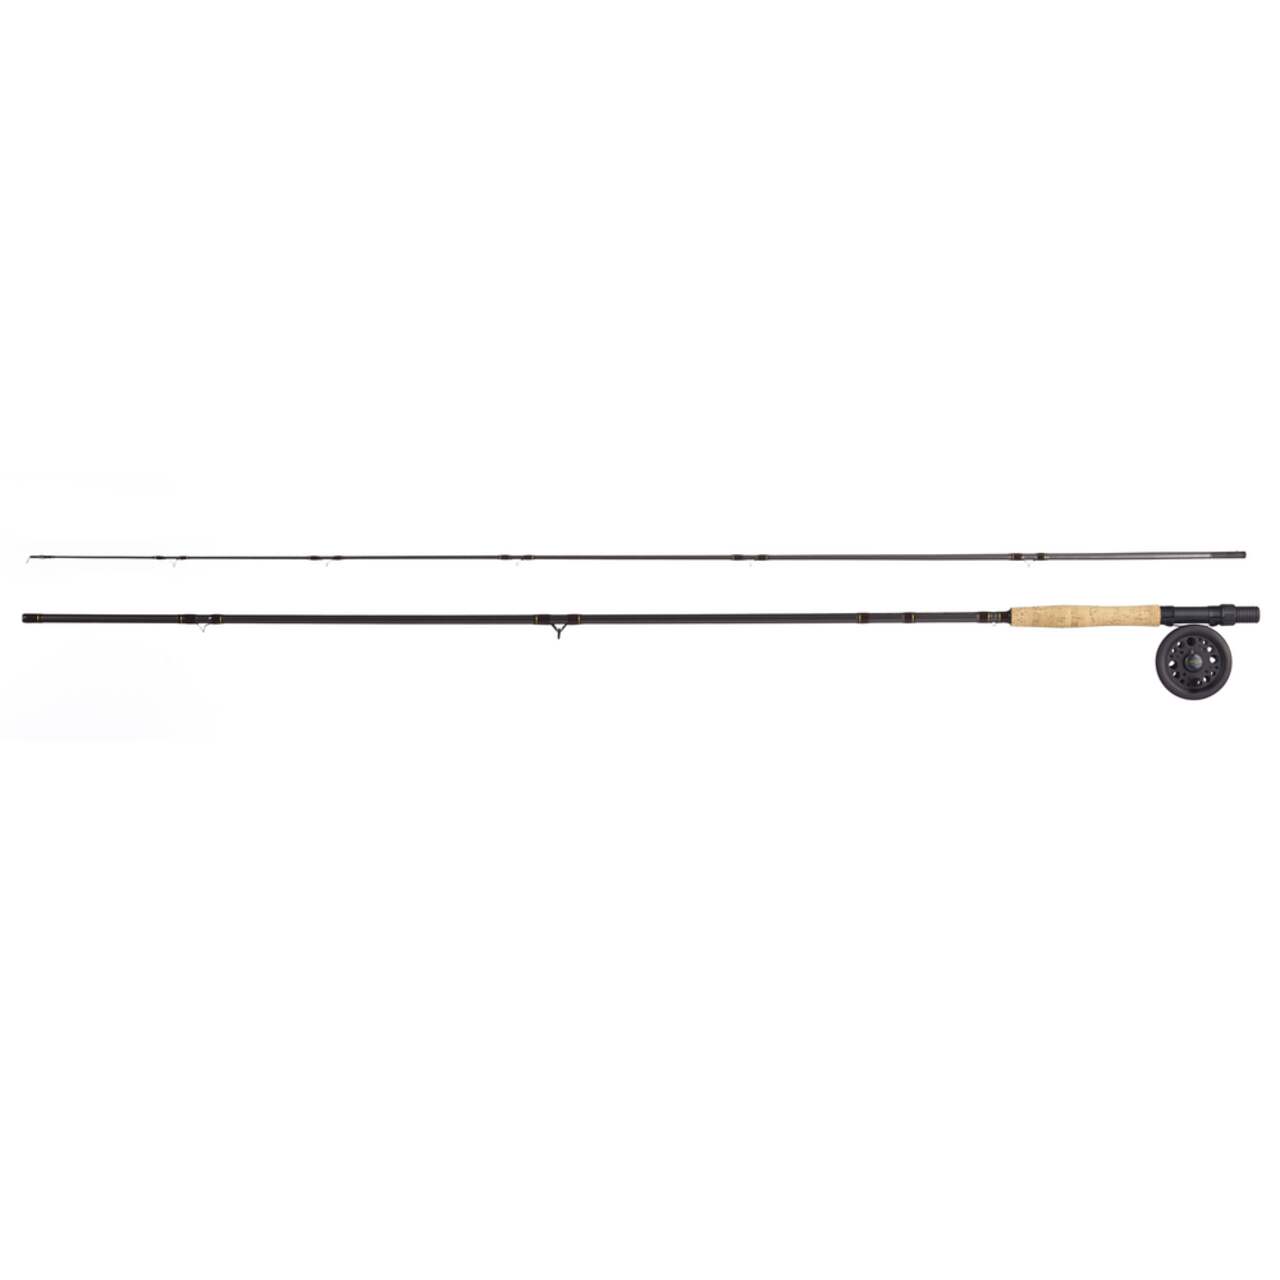 Martin Fly Fishing Reel with Line and 3-Piece Fly Rod (Size 5/6